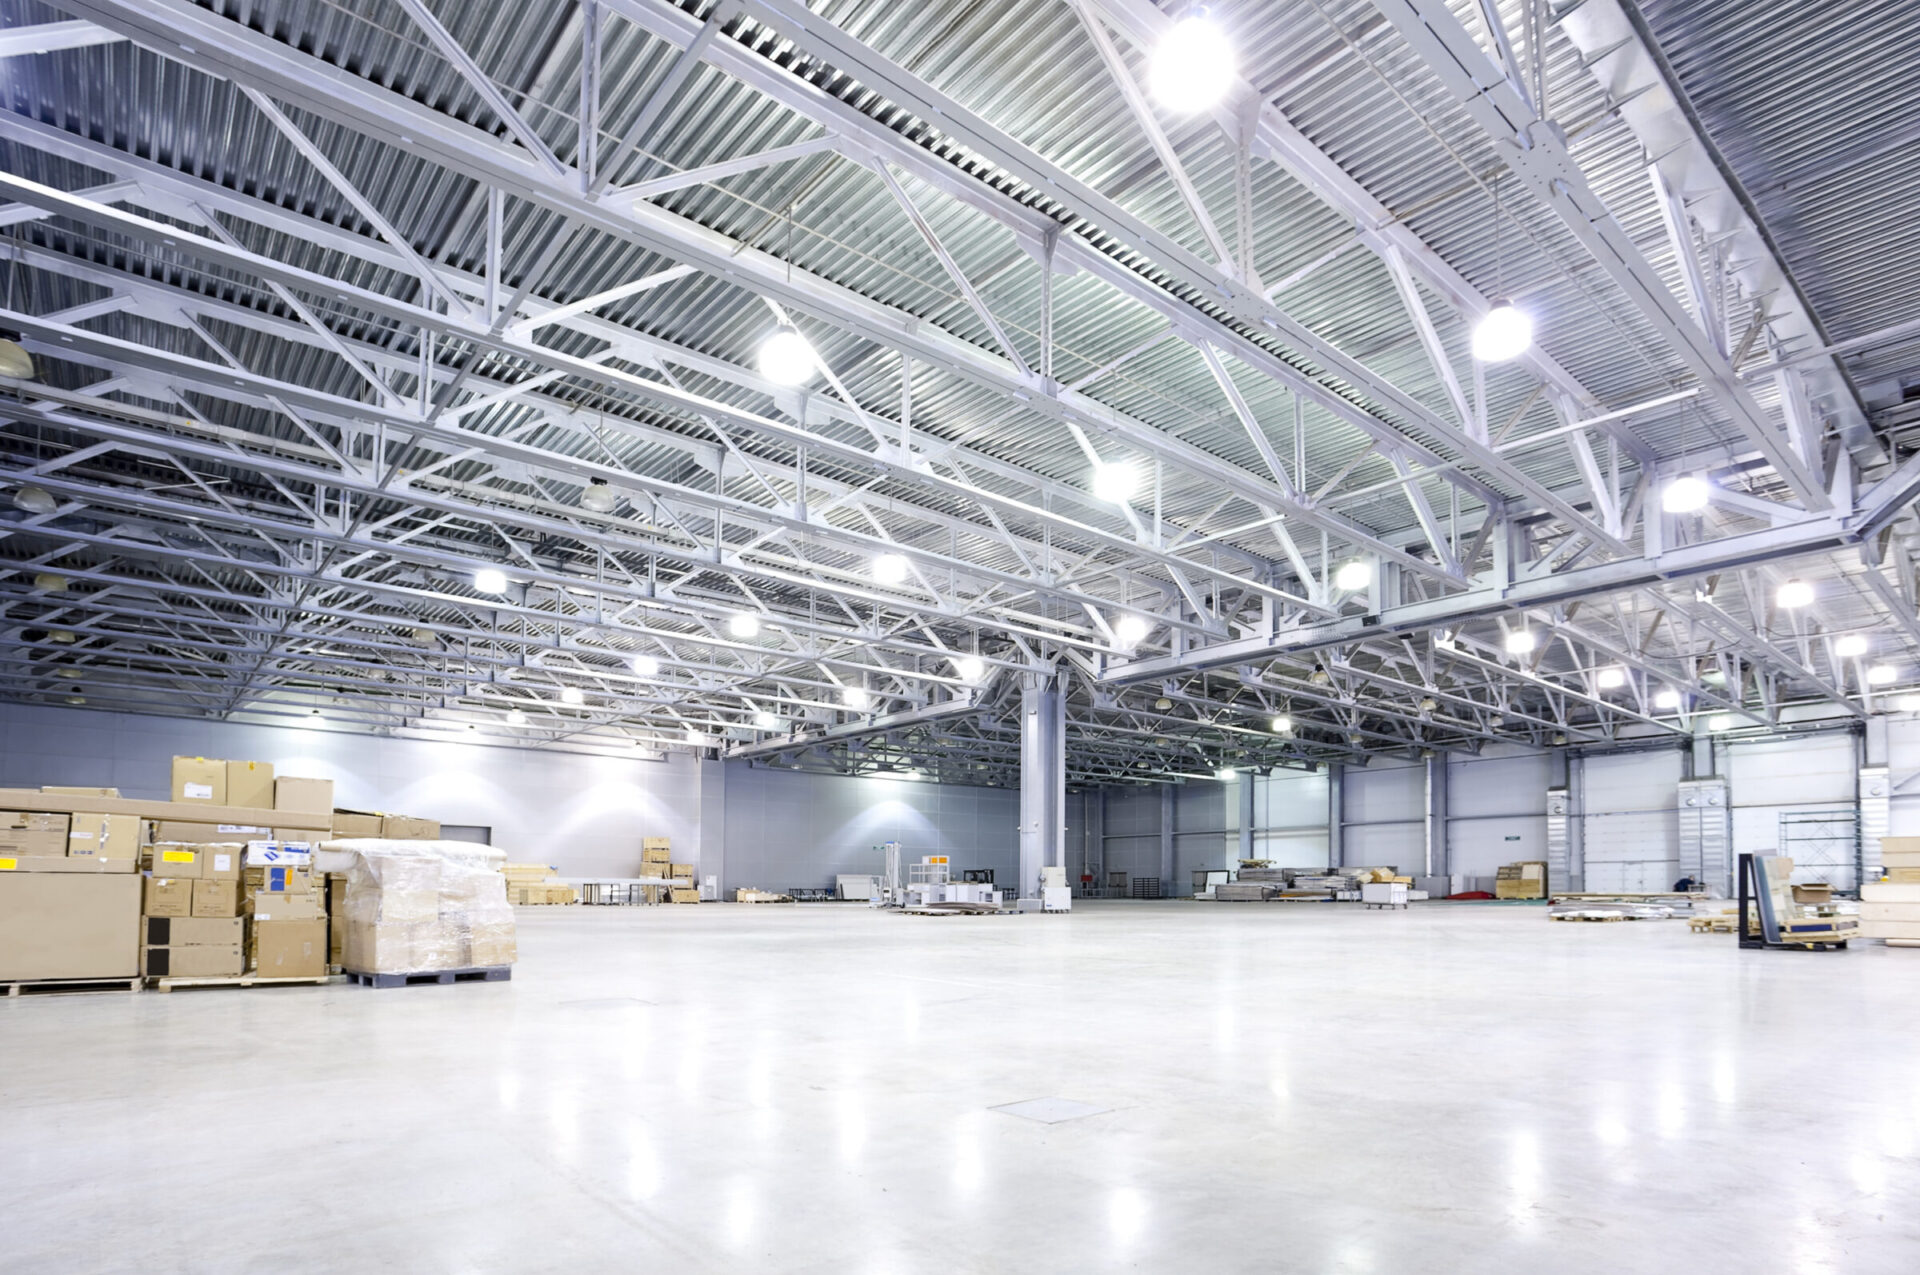 The image shows a spacious and brightly lit empty warehouse with high ceilings, metal trusses, and scattered boxes on palettes.